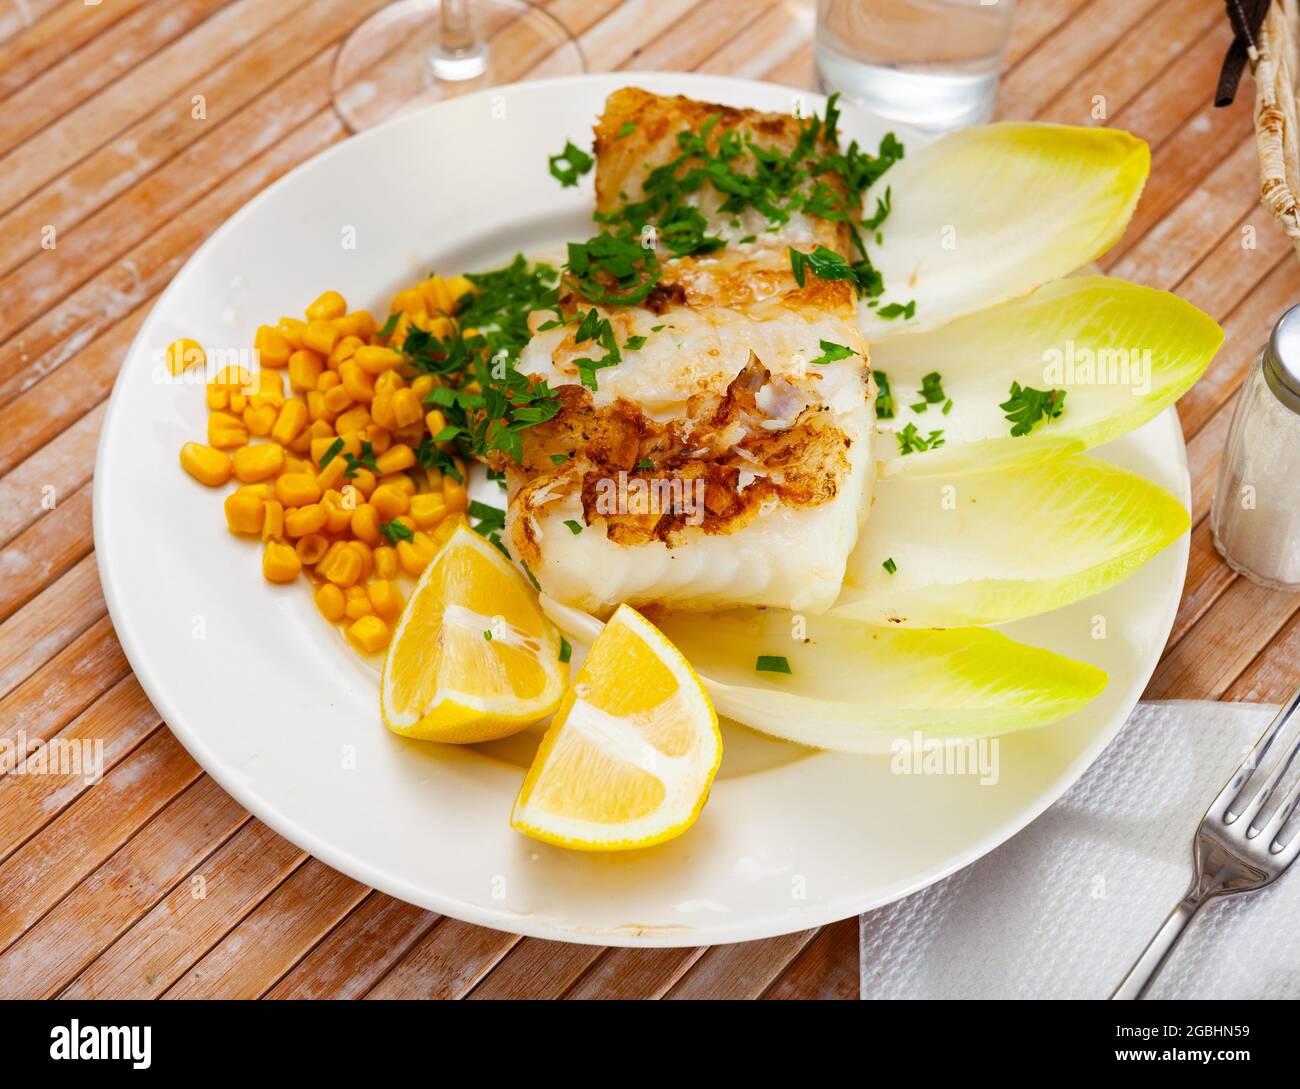 Fried rockling fillet with corn, lemon and greens Stock Photo